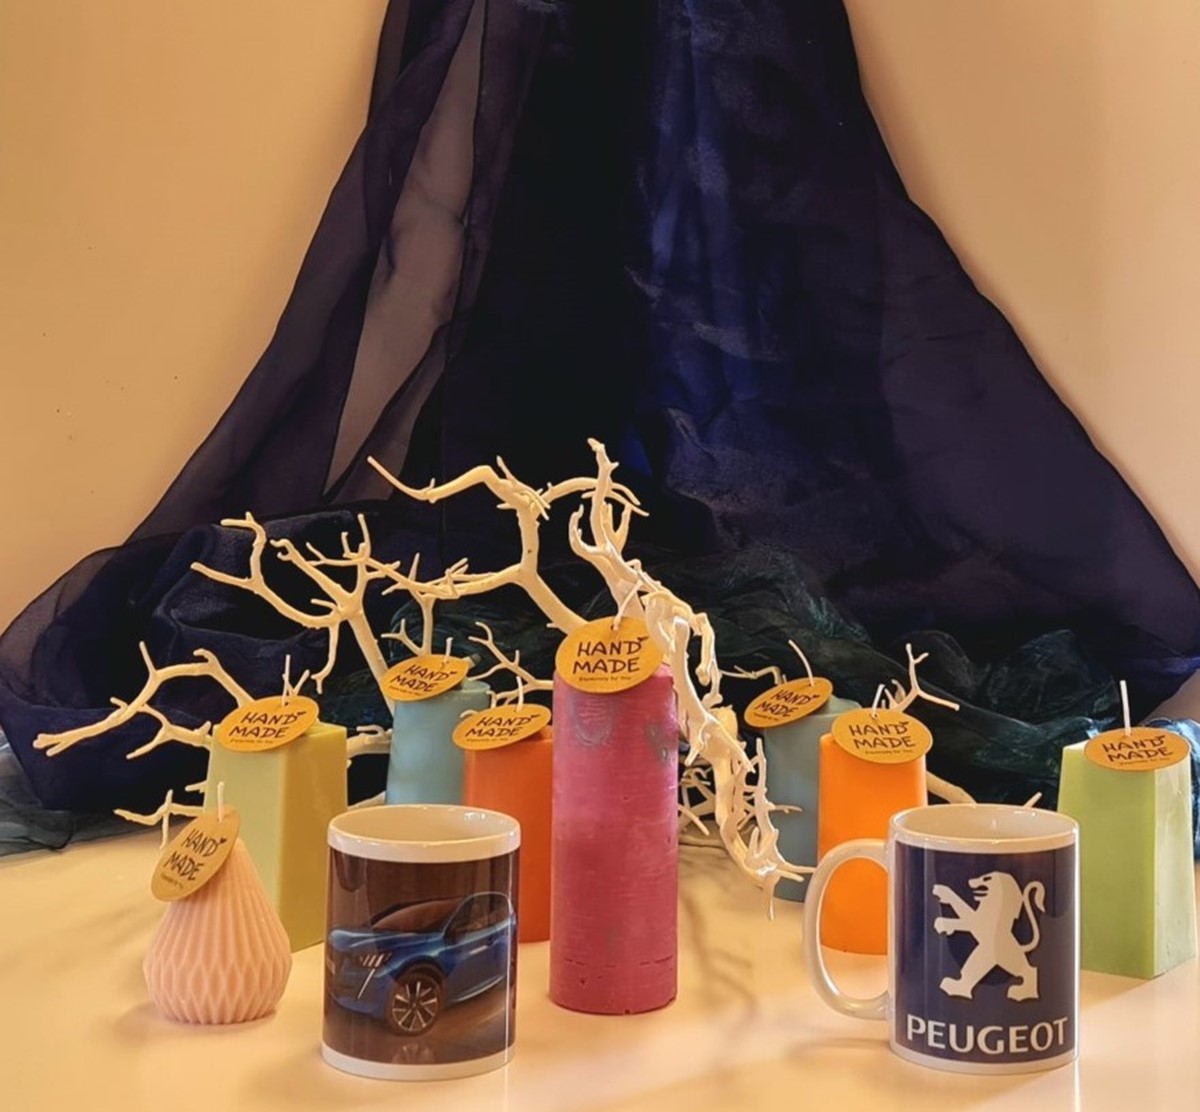 An array of brightly coloured, hand-crafted candles on a table in front of a navy blue velvet curtain